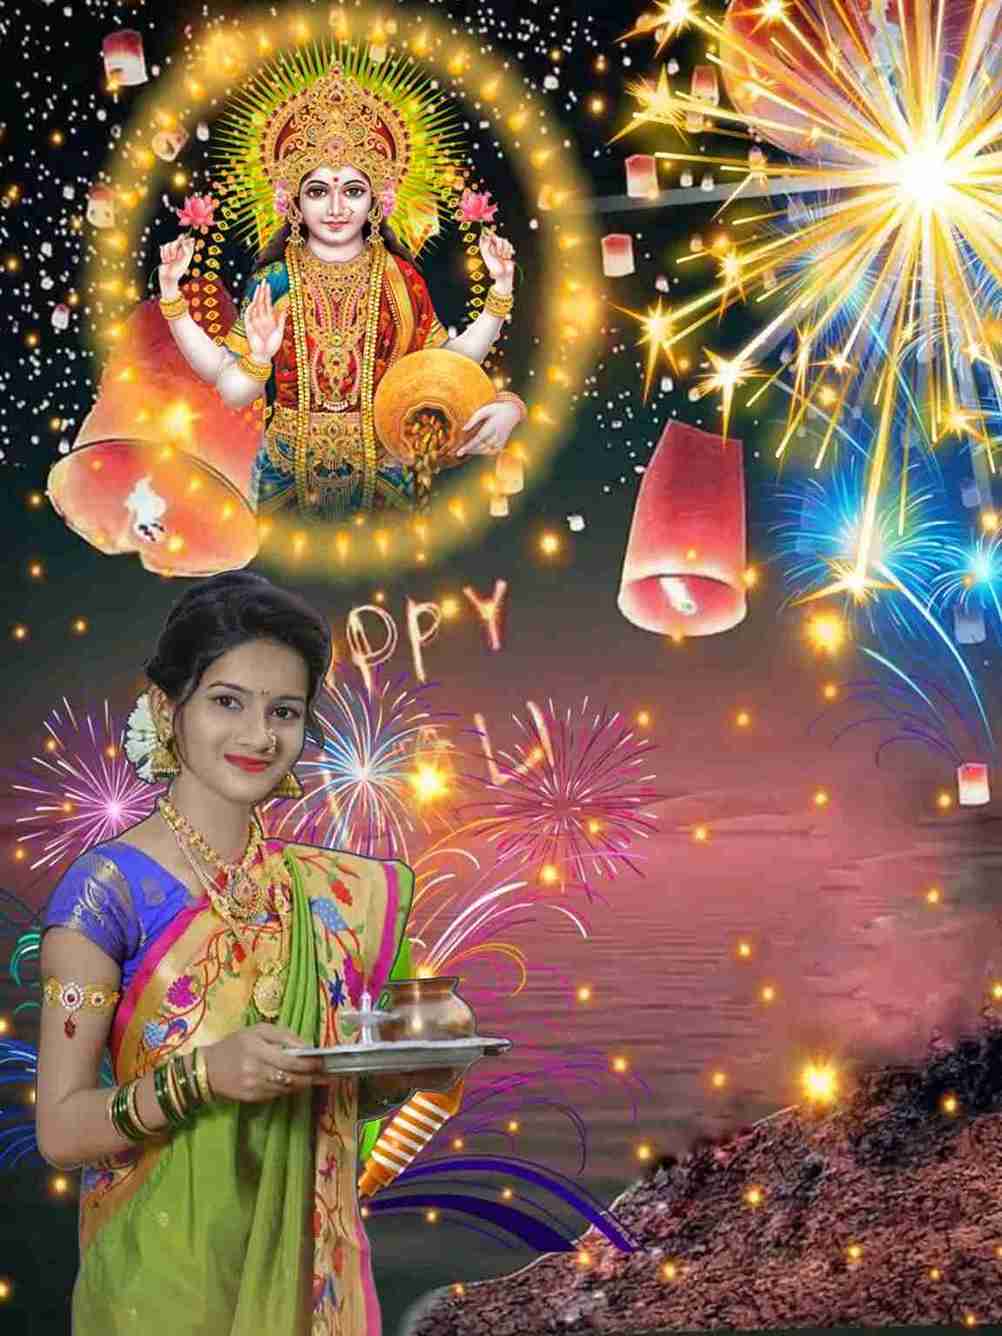 Happy Diwali Editing Background New and Diwali Background HD for Editing